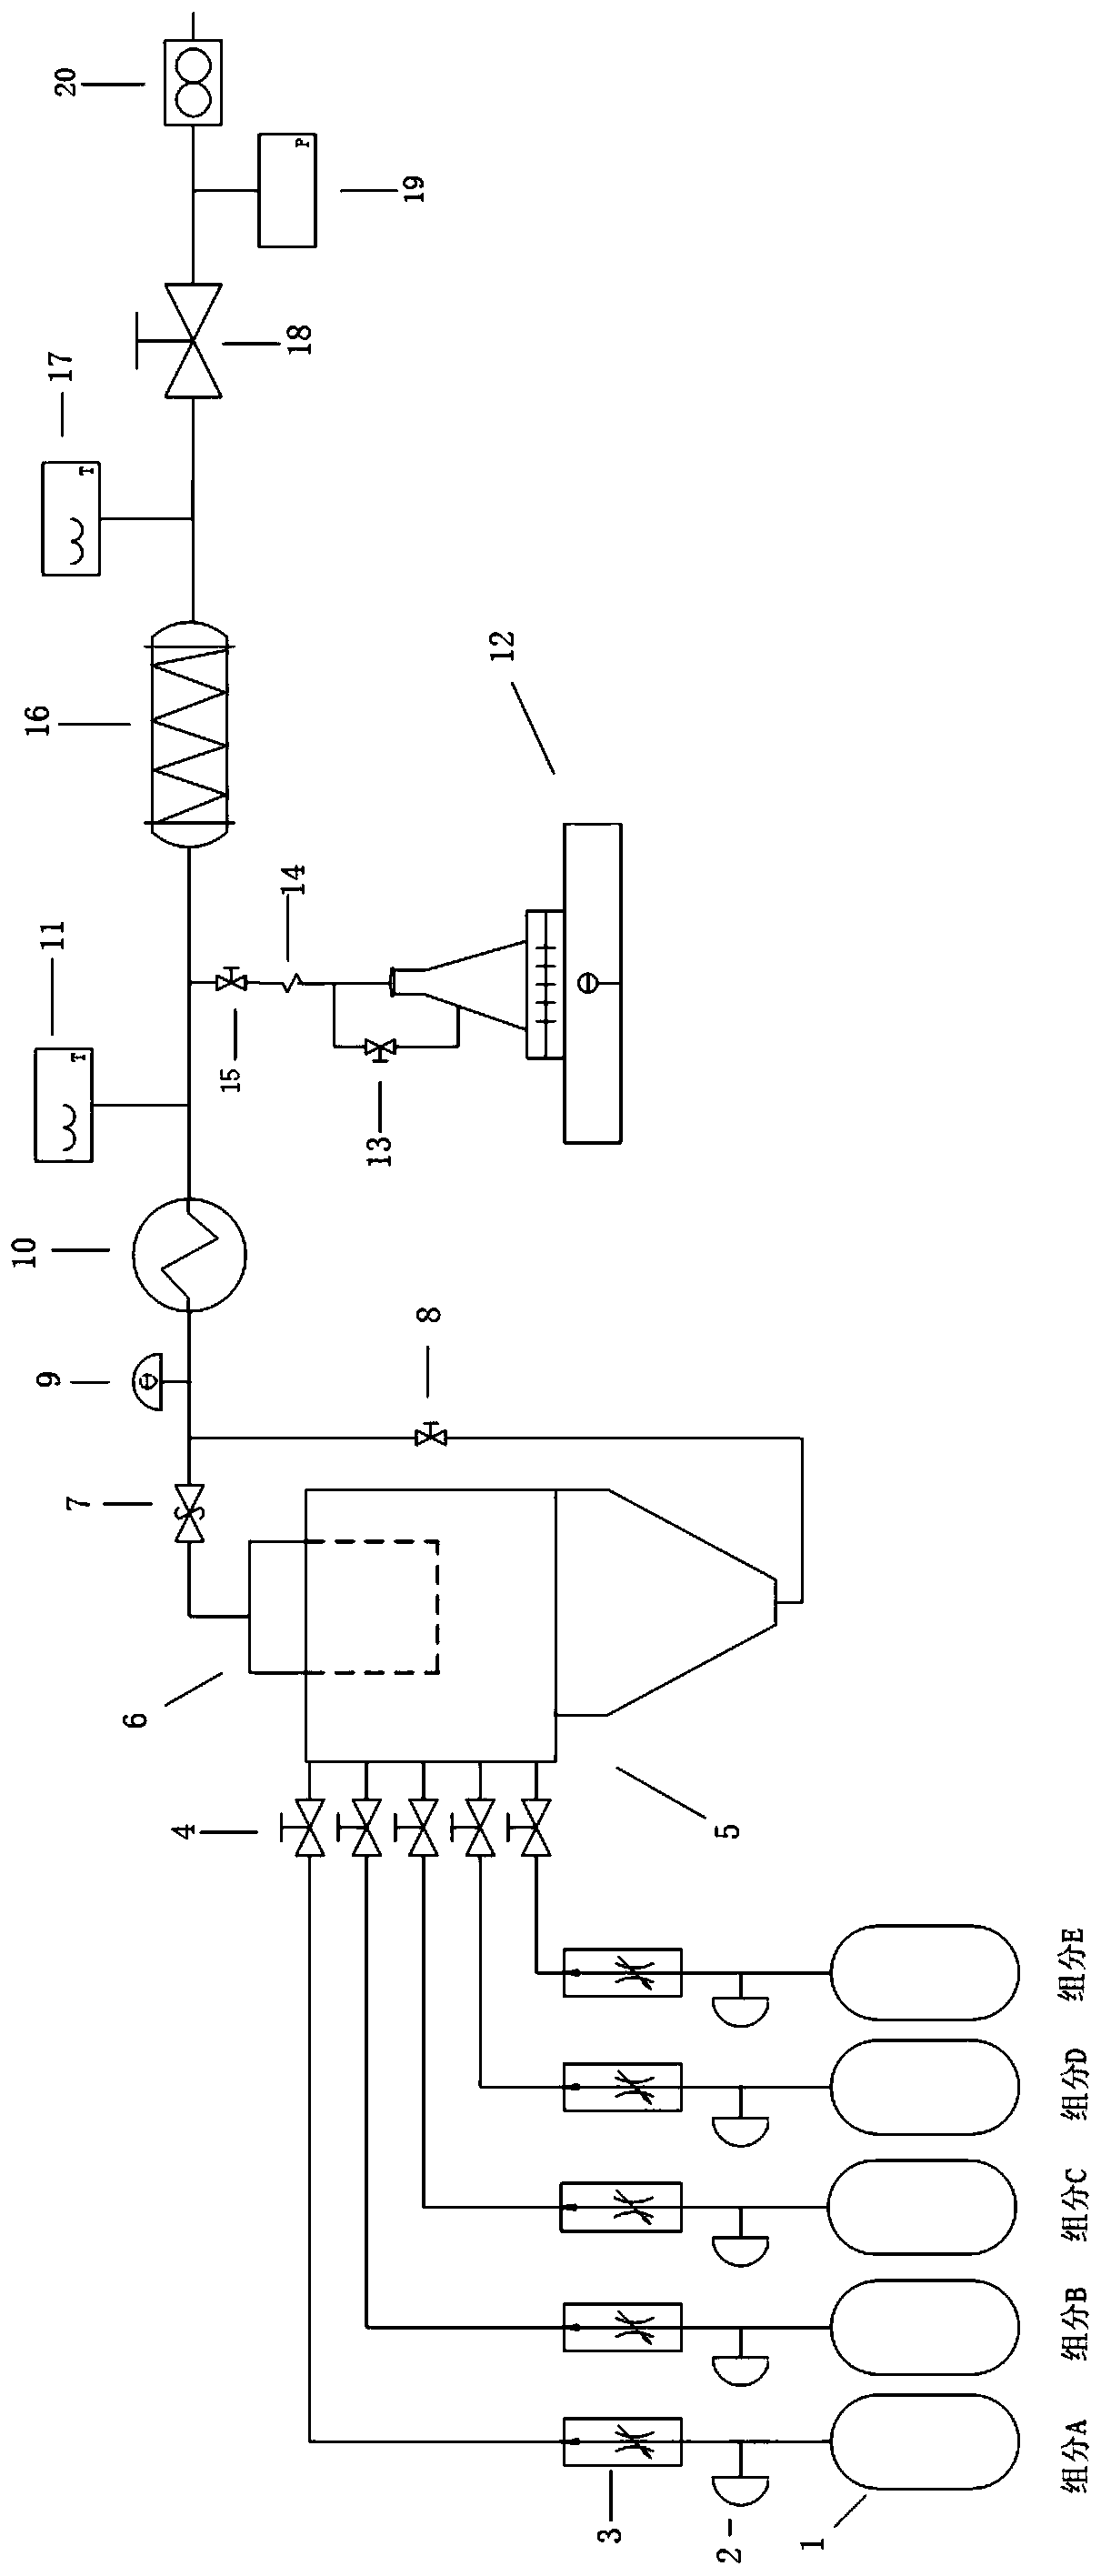 Multi-component gas simulation mixing system